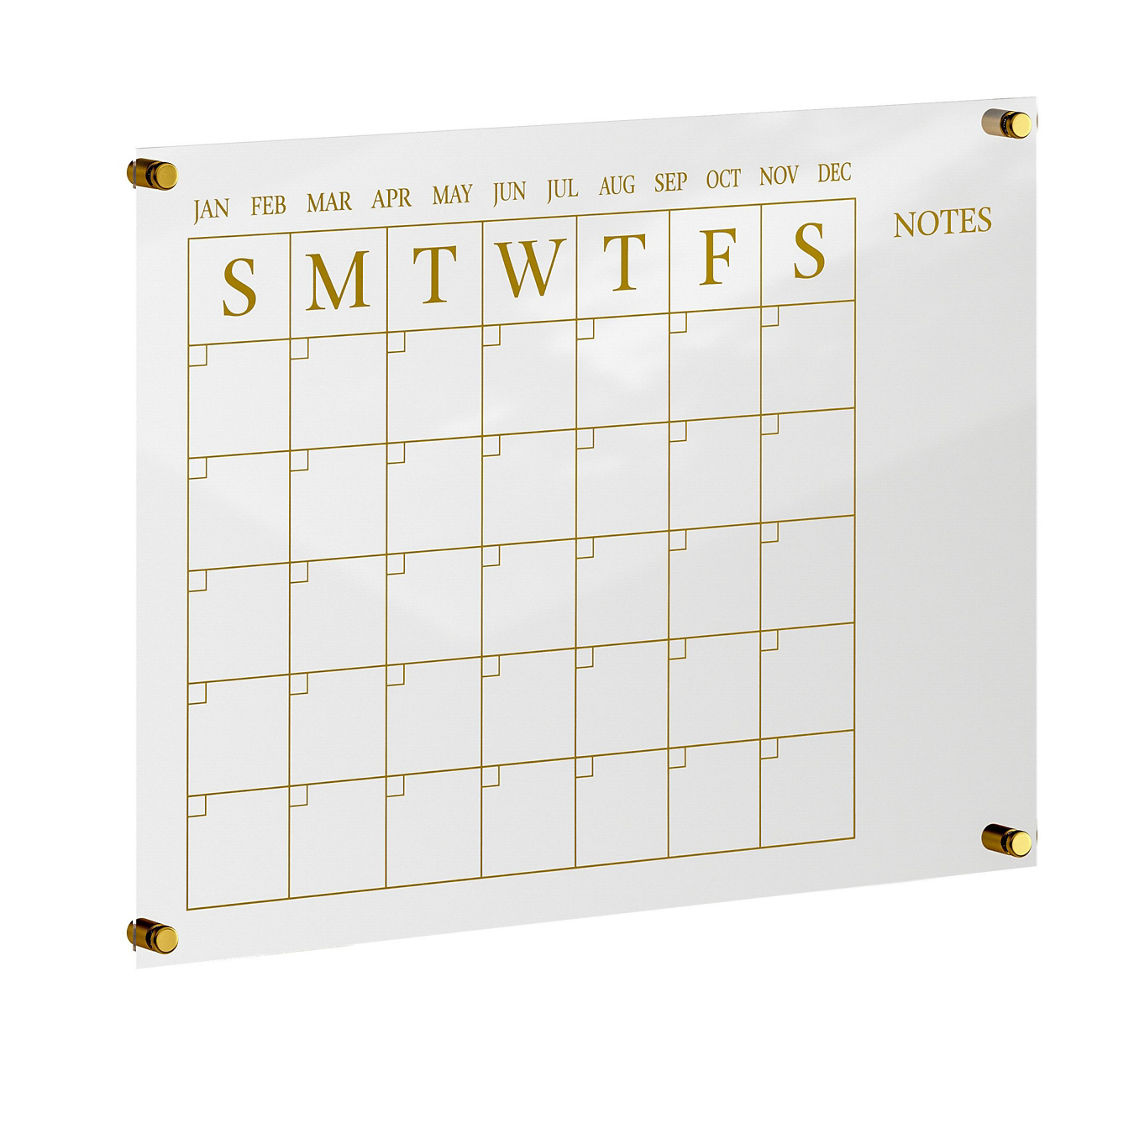 Martha Stewart Acrylic Monthly Wall Calendar with Notes - Image 2 of 5